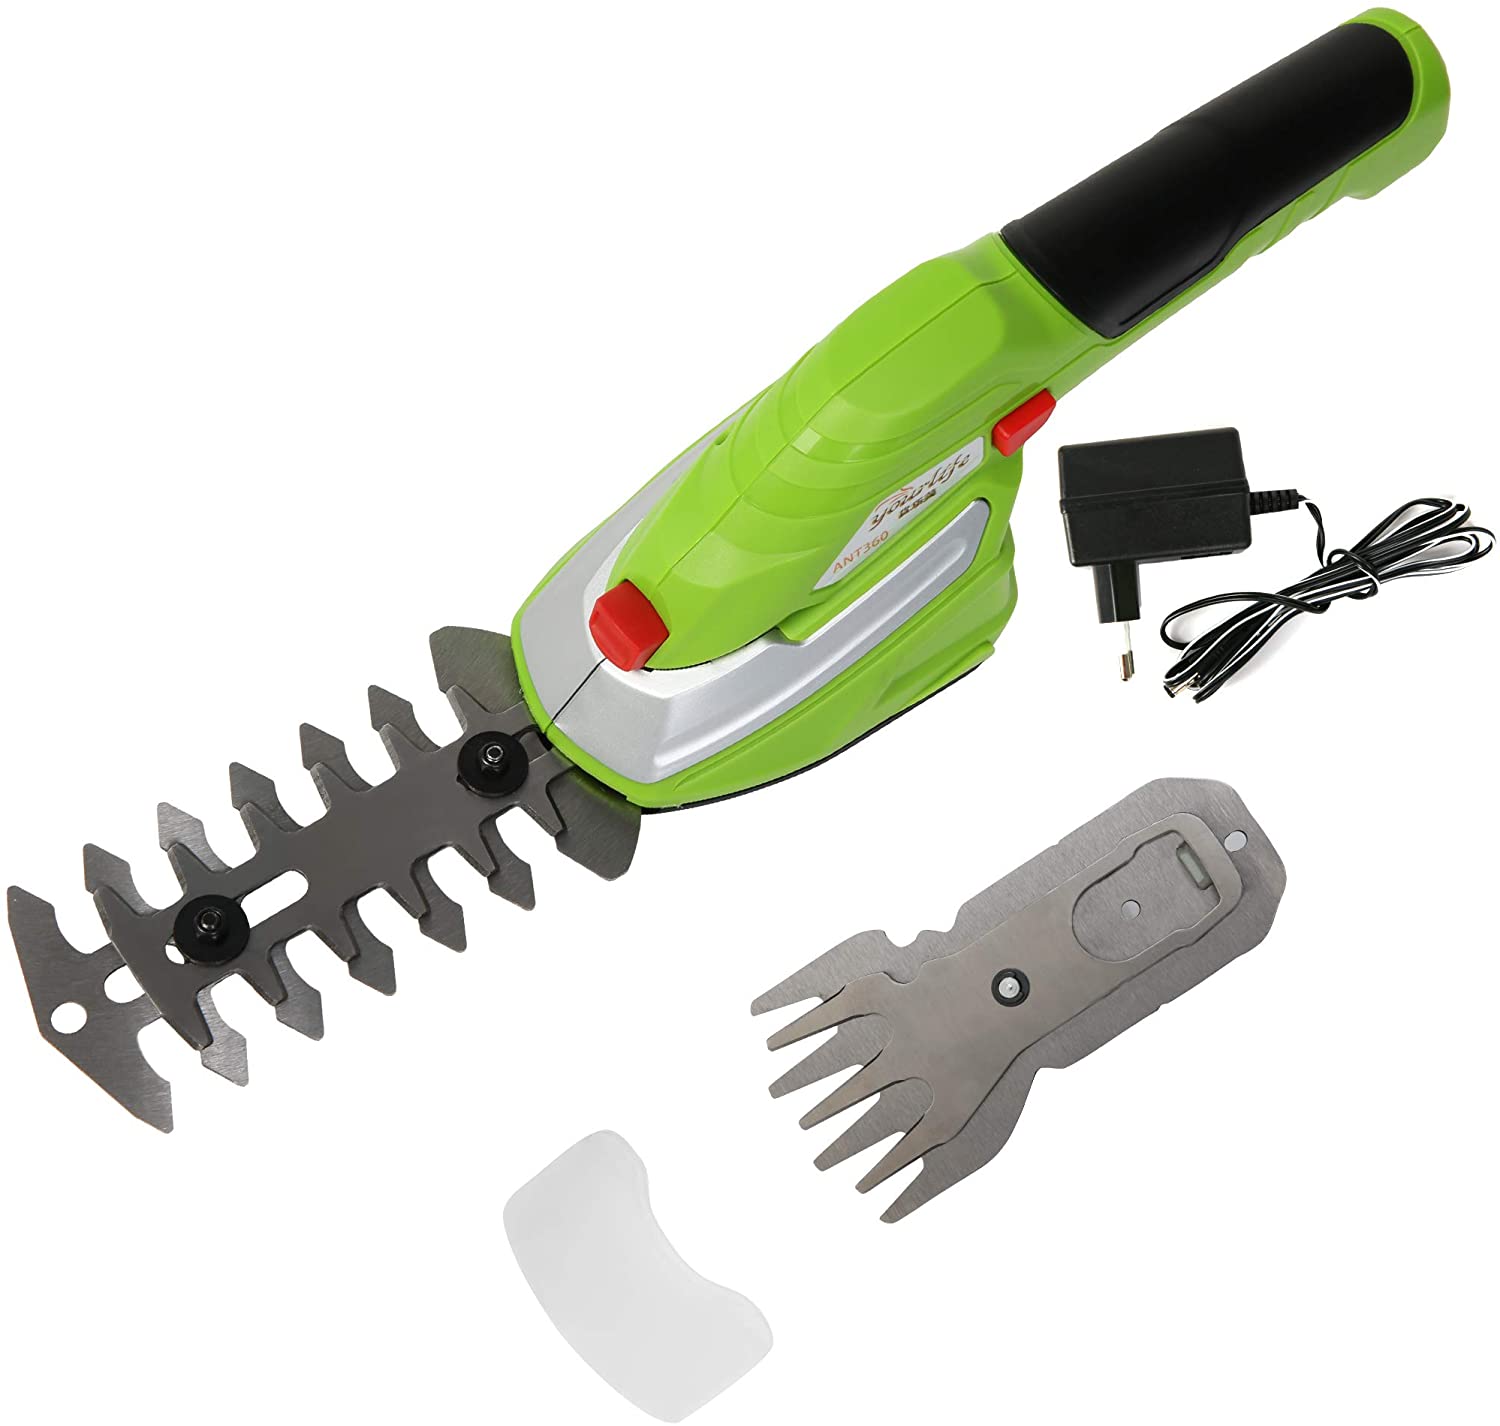 2-in-1 Cordless Hedge Trimmer 60min Shrubber w/Protective Shells Grass Shear Combo Rechargeable 3.6V Li-Ion Battery 2.45 lbs for Easy-Carry - Luckyermore